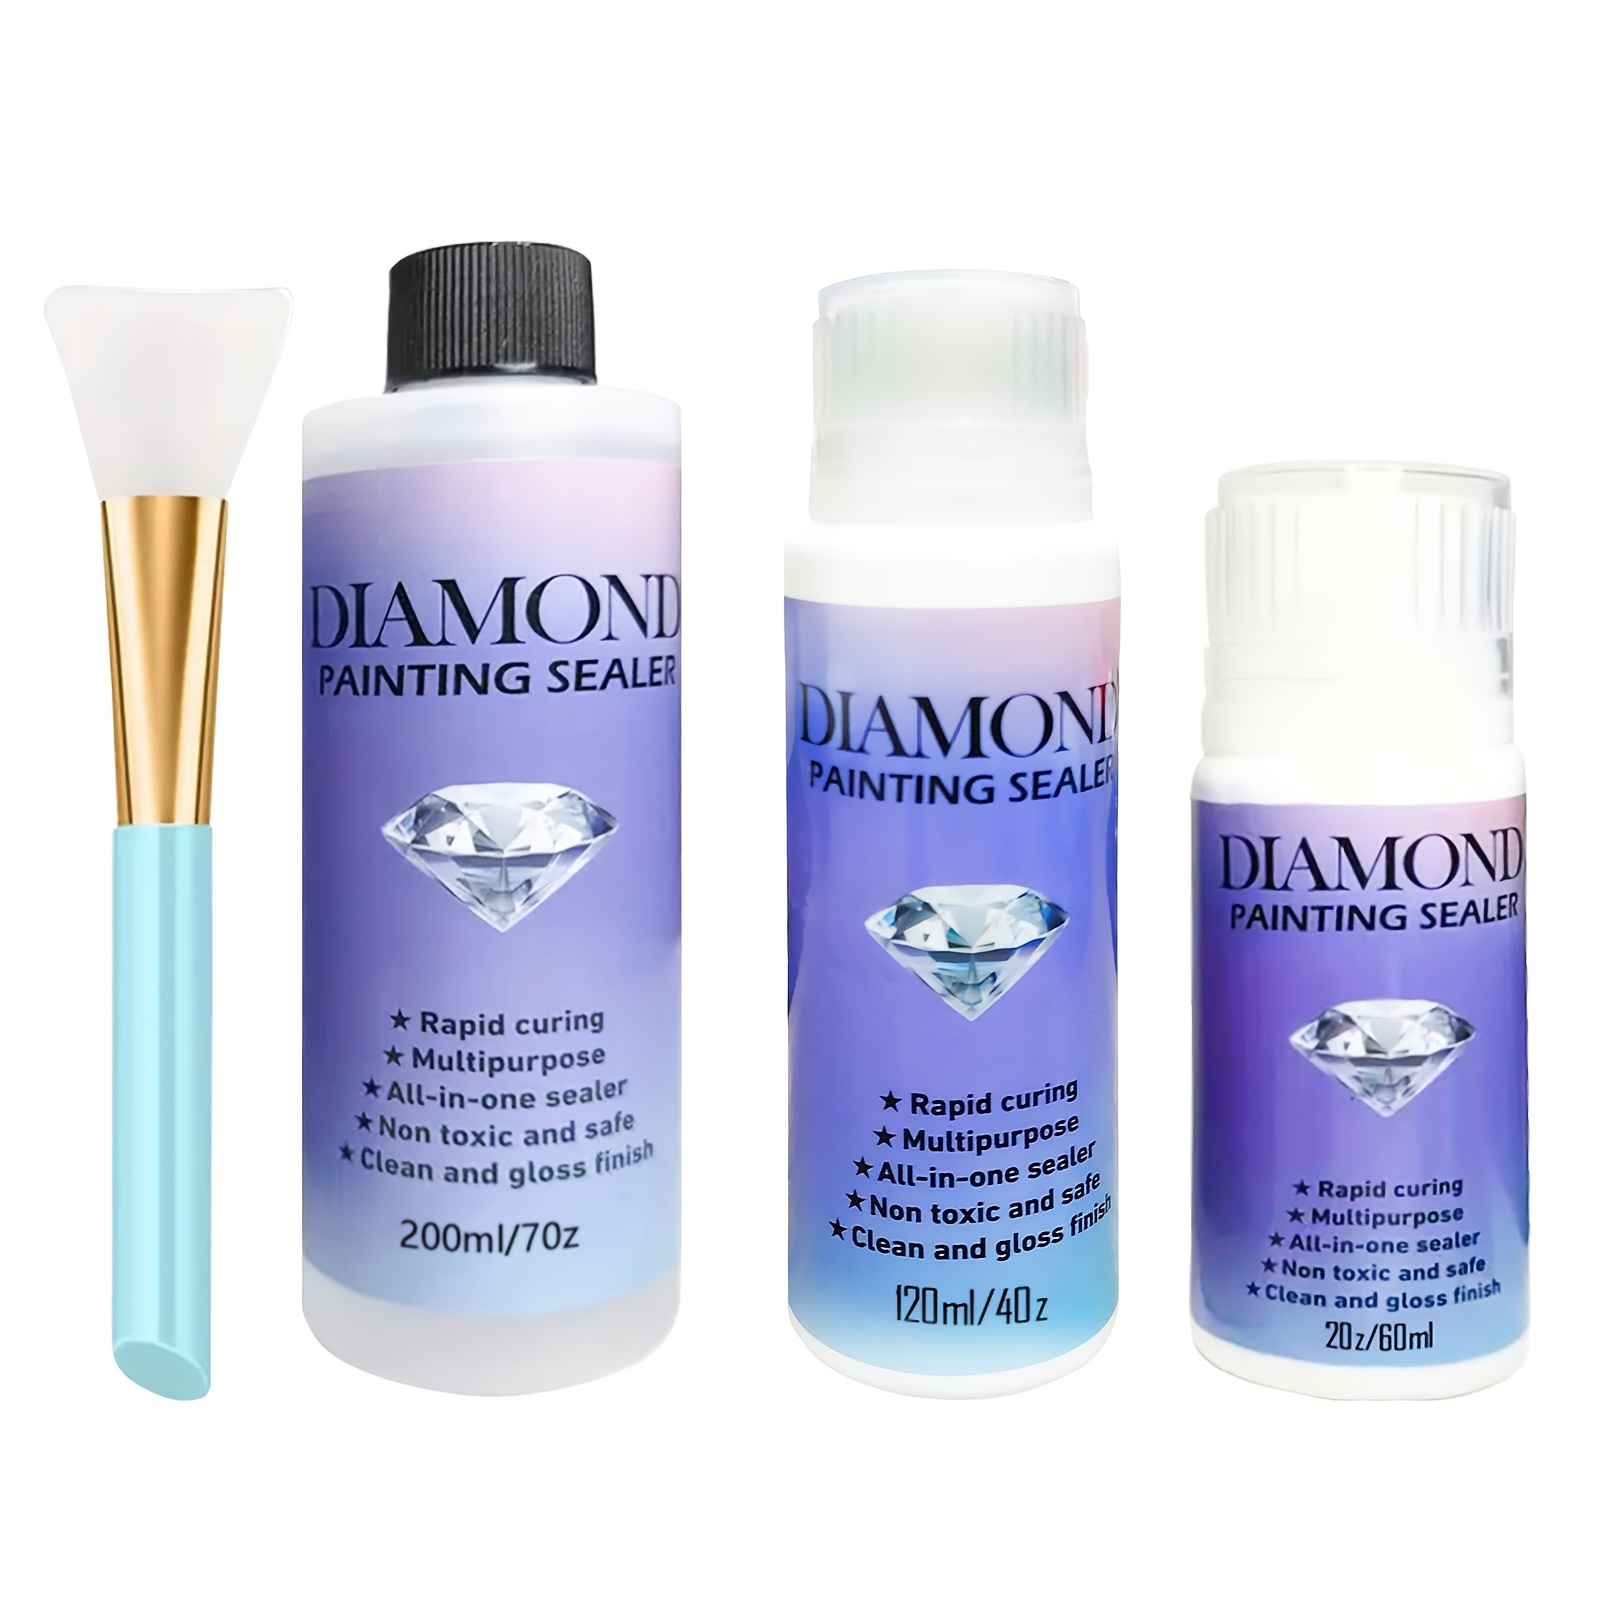  Diamond Painting Sealer 240 ML/8 OZ with Silicone Brush, 5D  Diamond Art Sealer Permanent Hold Shine Effect for Protect Diamond Painting  and Puzzle, Non-Toxic Glue Used by Adult and Children Safely